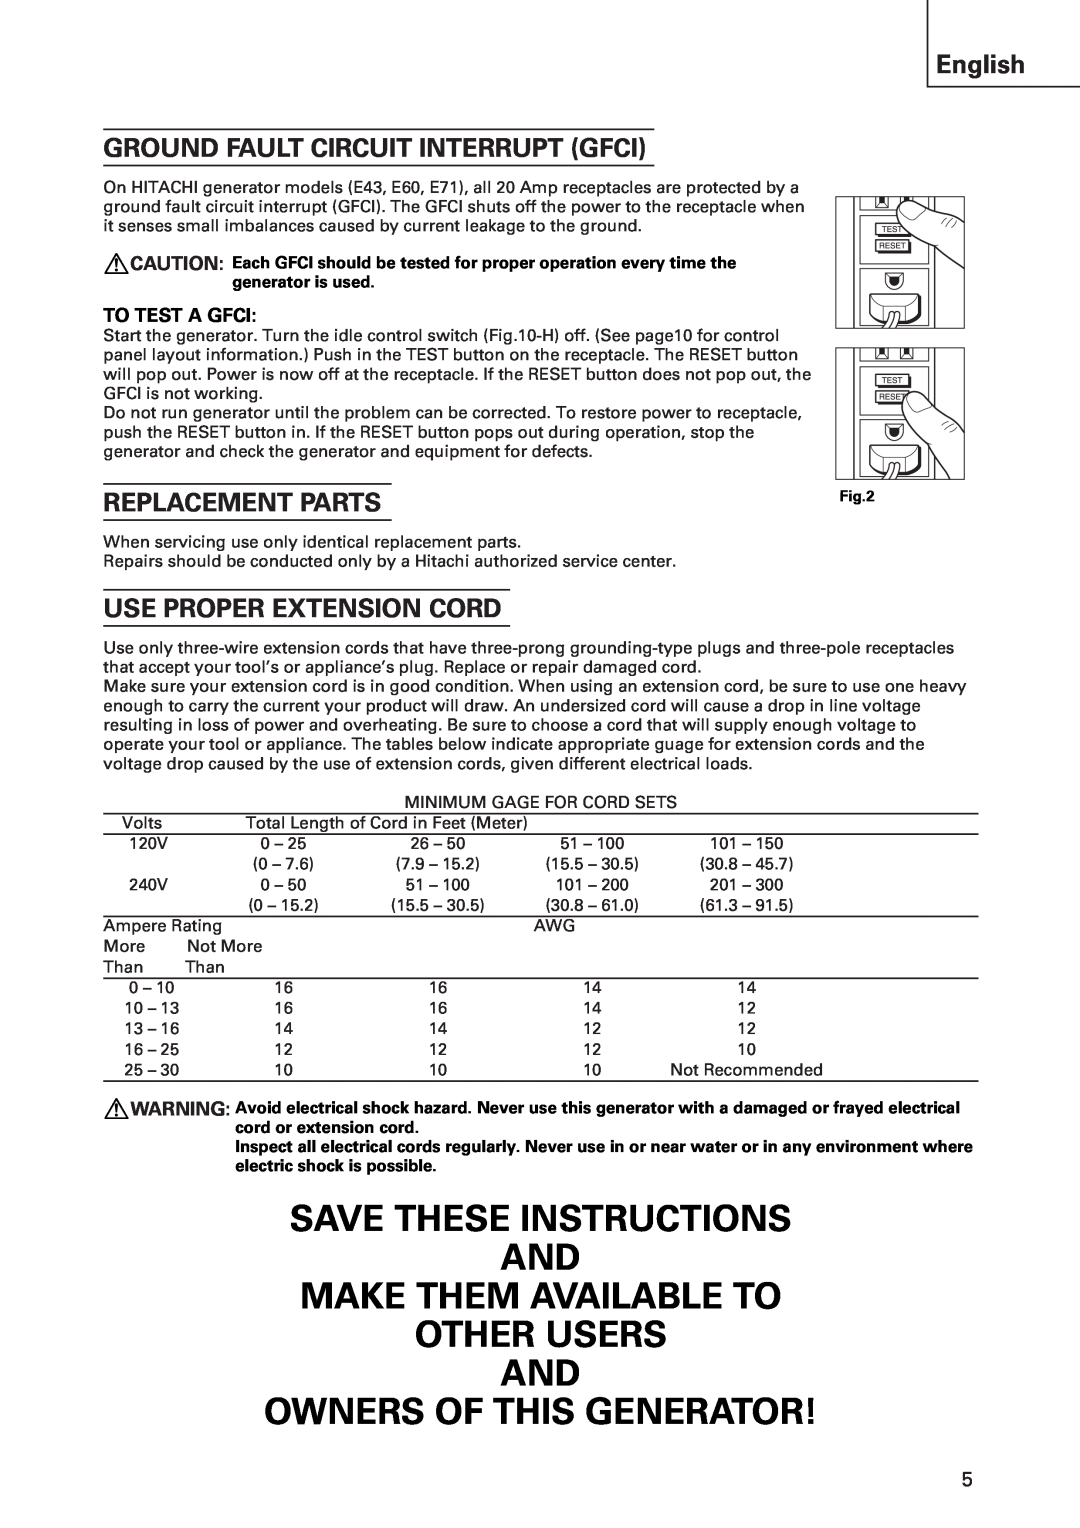 Hitachi E43 Save These Instructions And Make Them Available To Other Users And, Owners Of This Generator, To Test A Gfci 